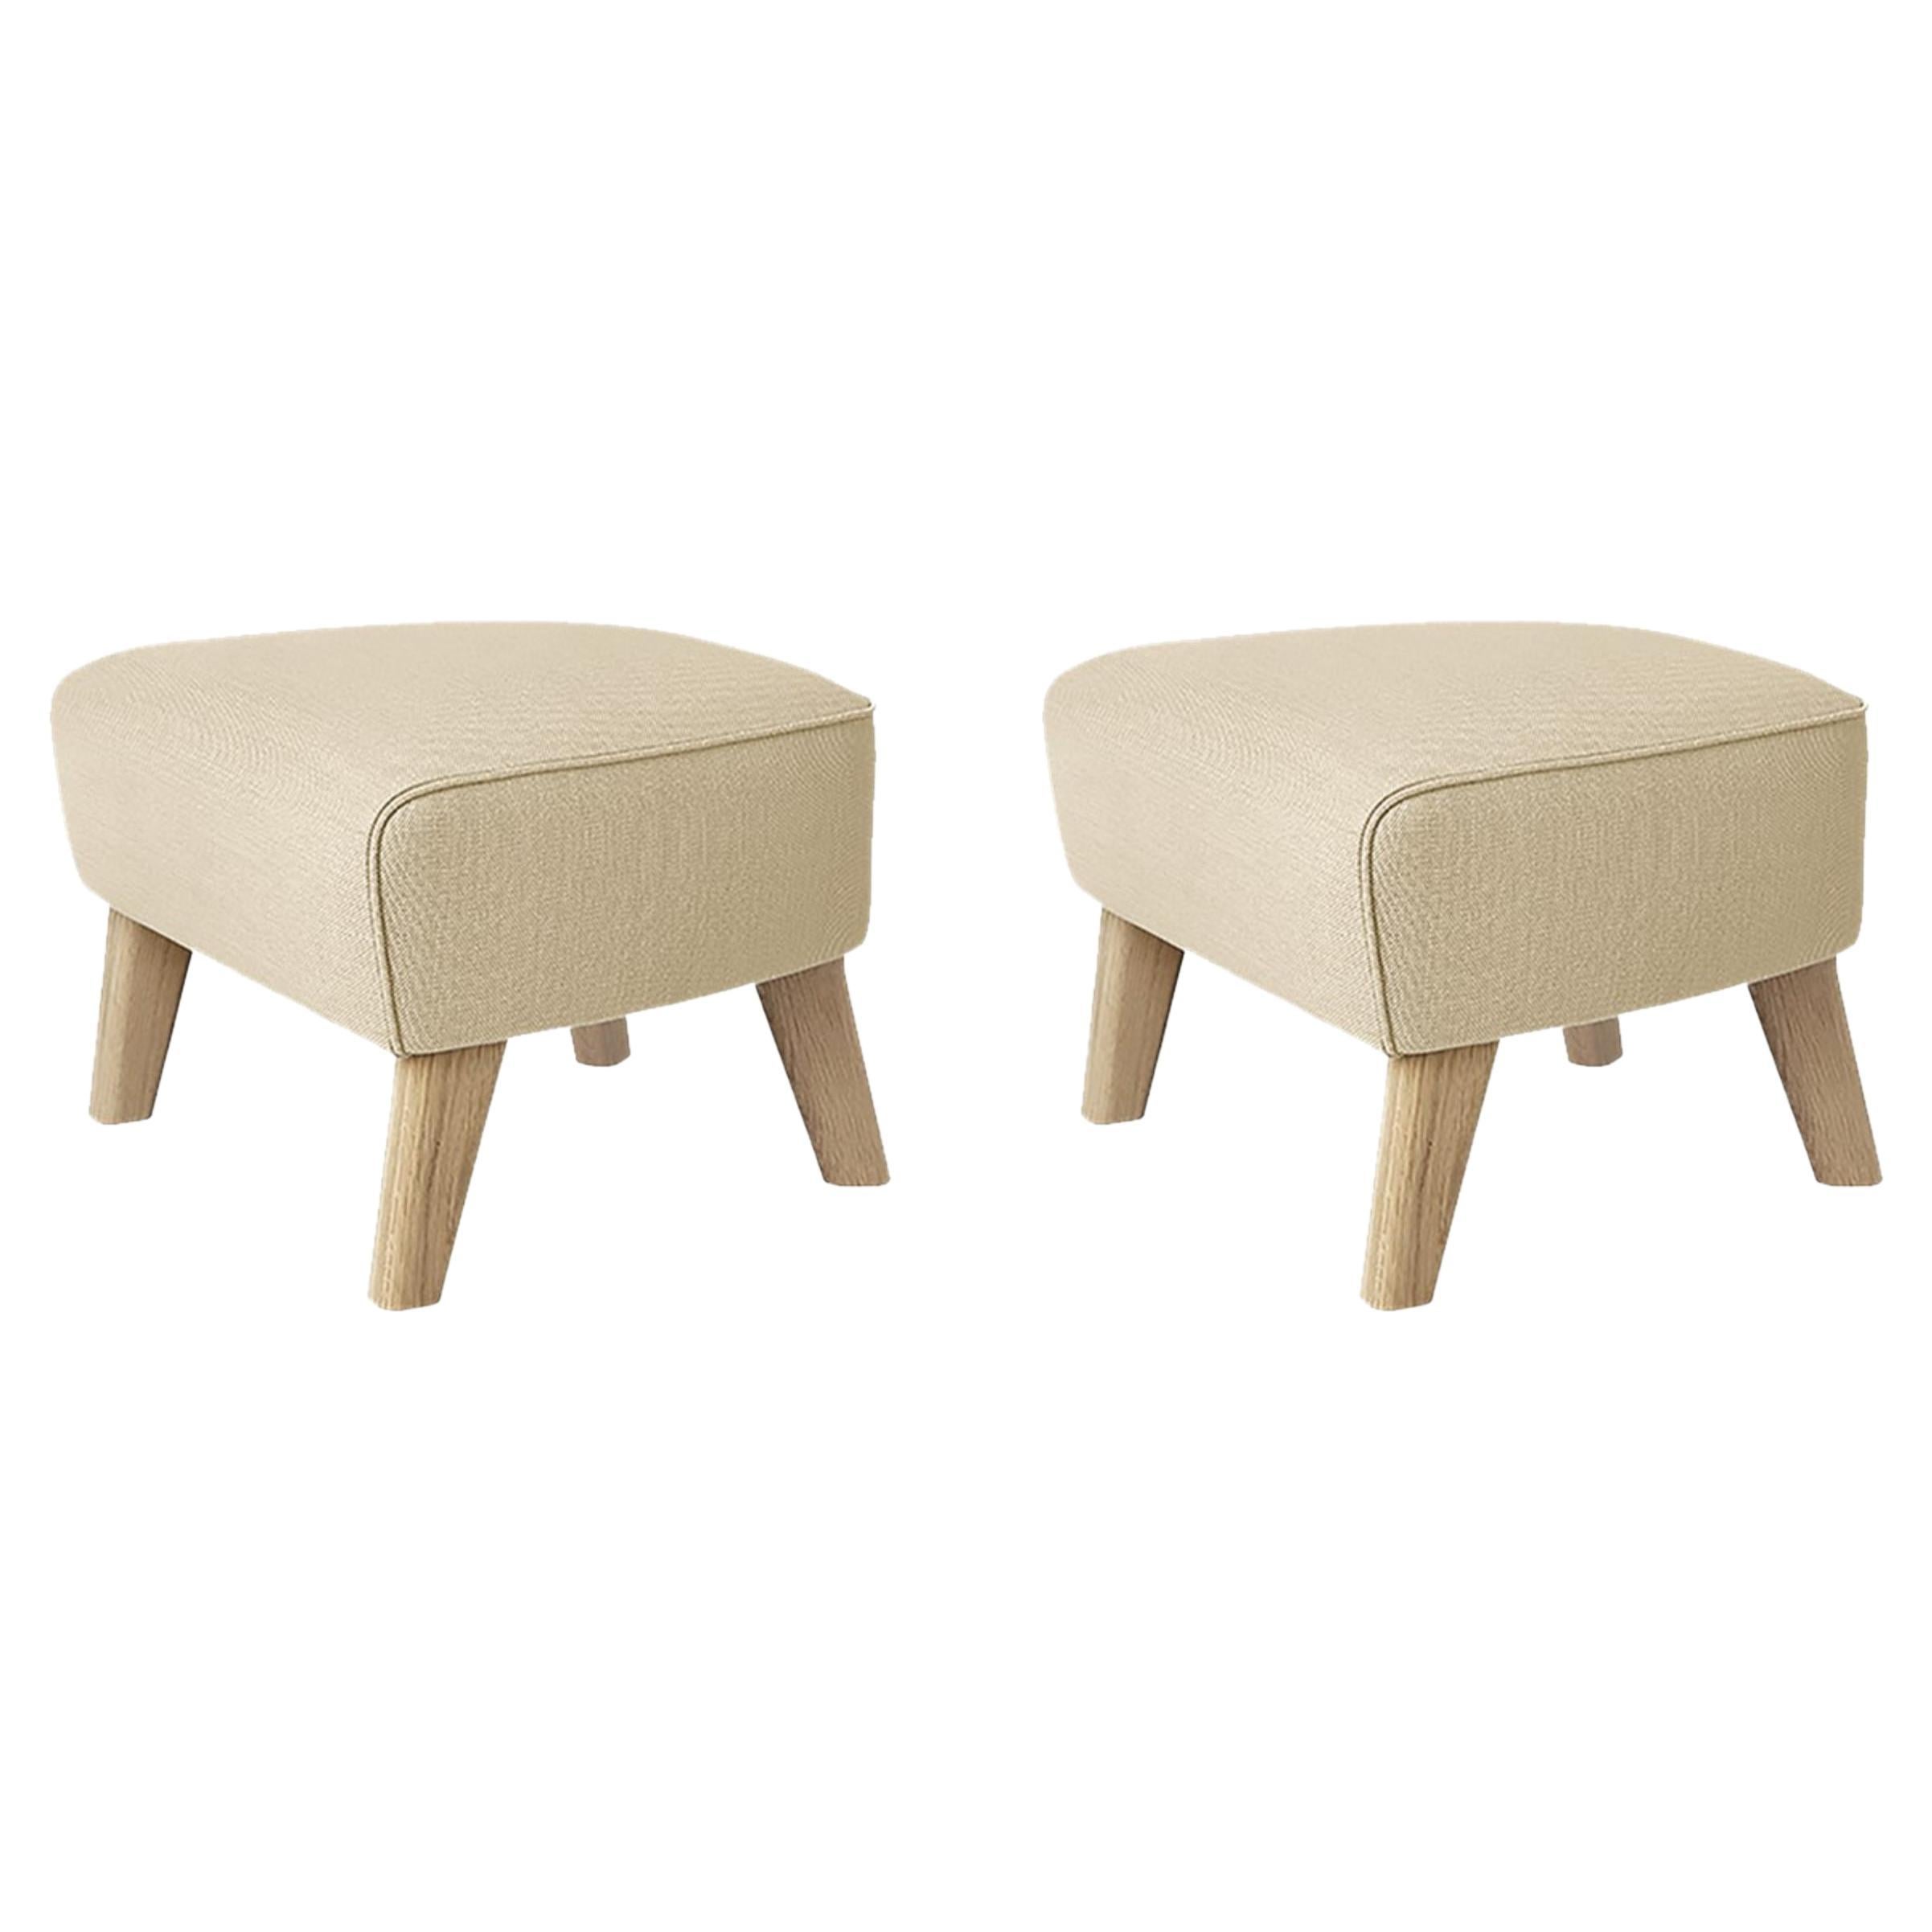 Set of 2 Sand and Natural Oak Sahco Zero Footstool by Lassen For Sale